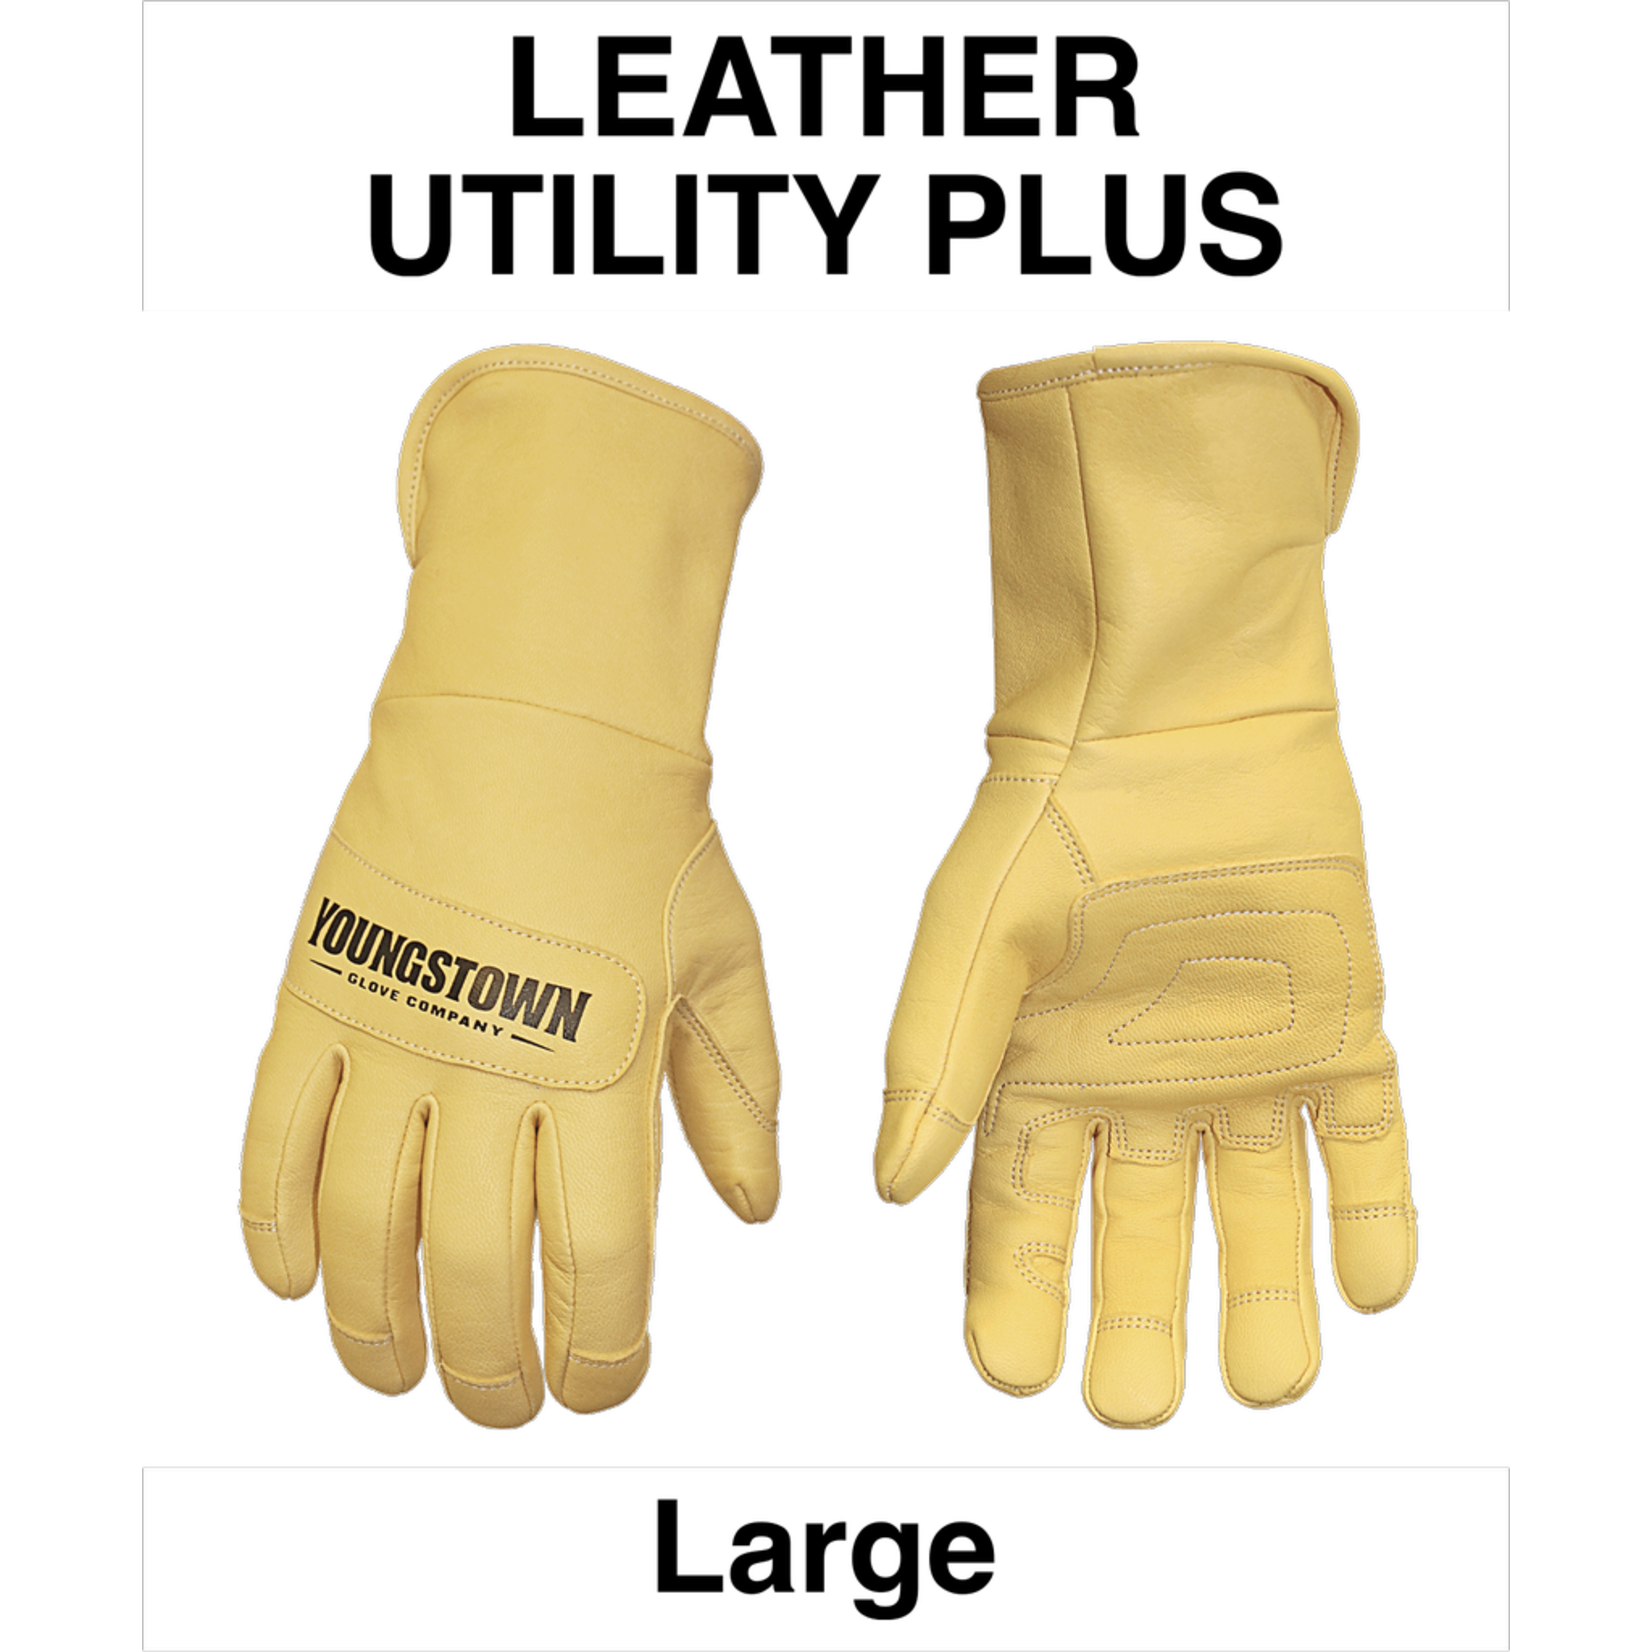 Youngstown Gloves Leather Utility Plus